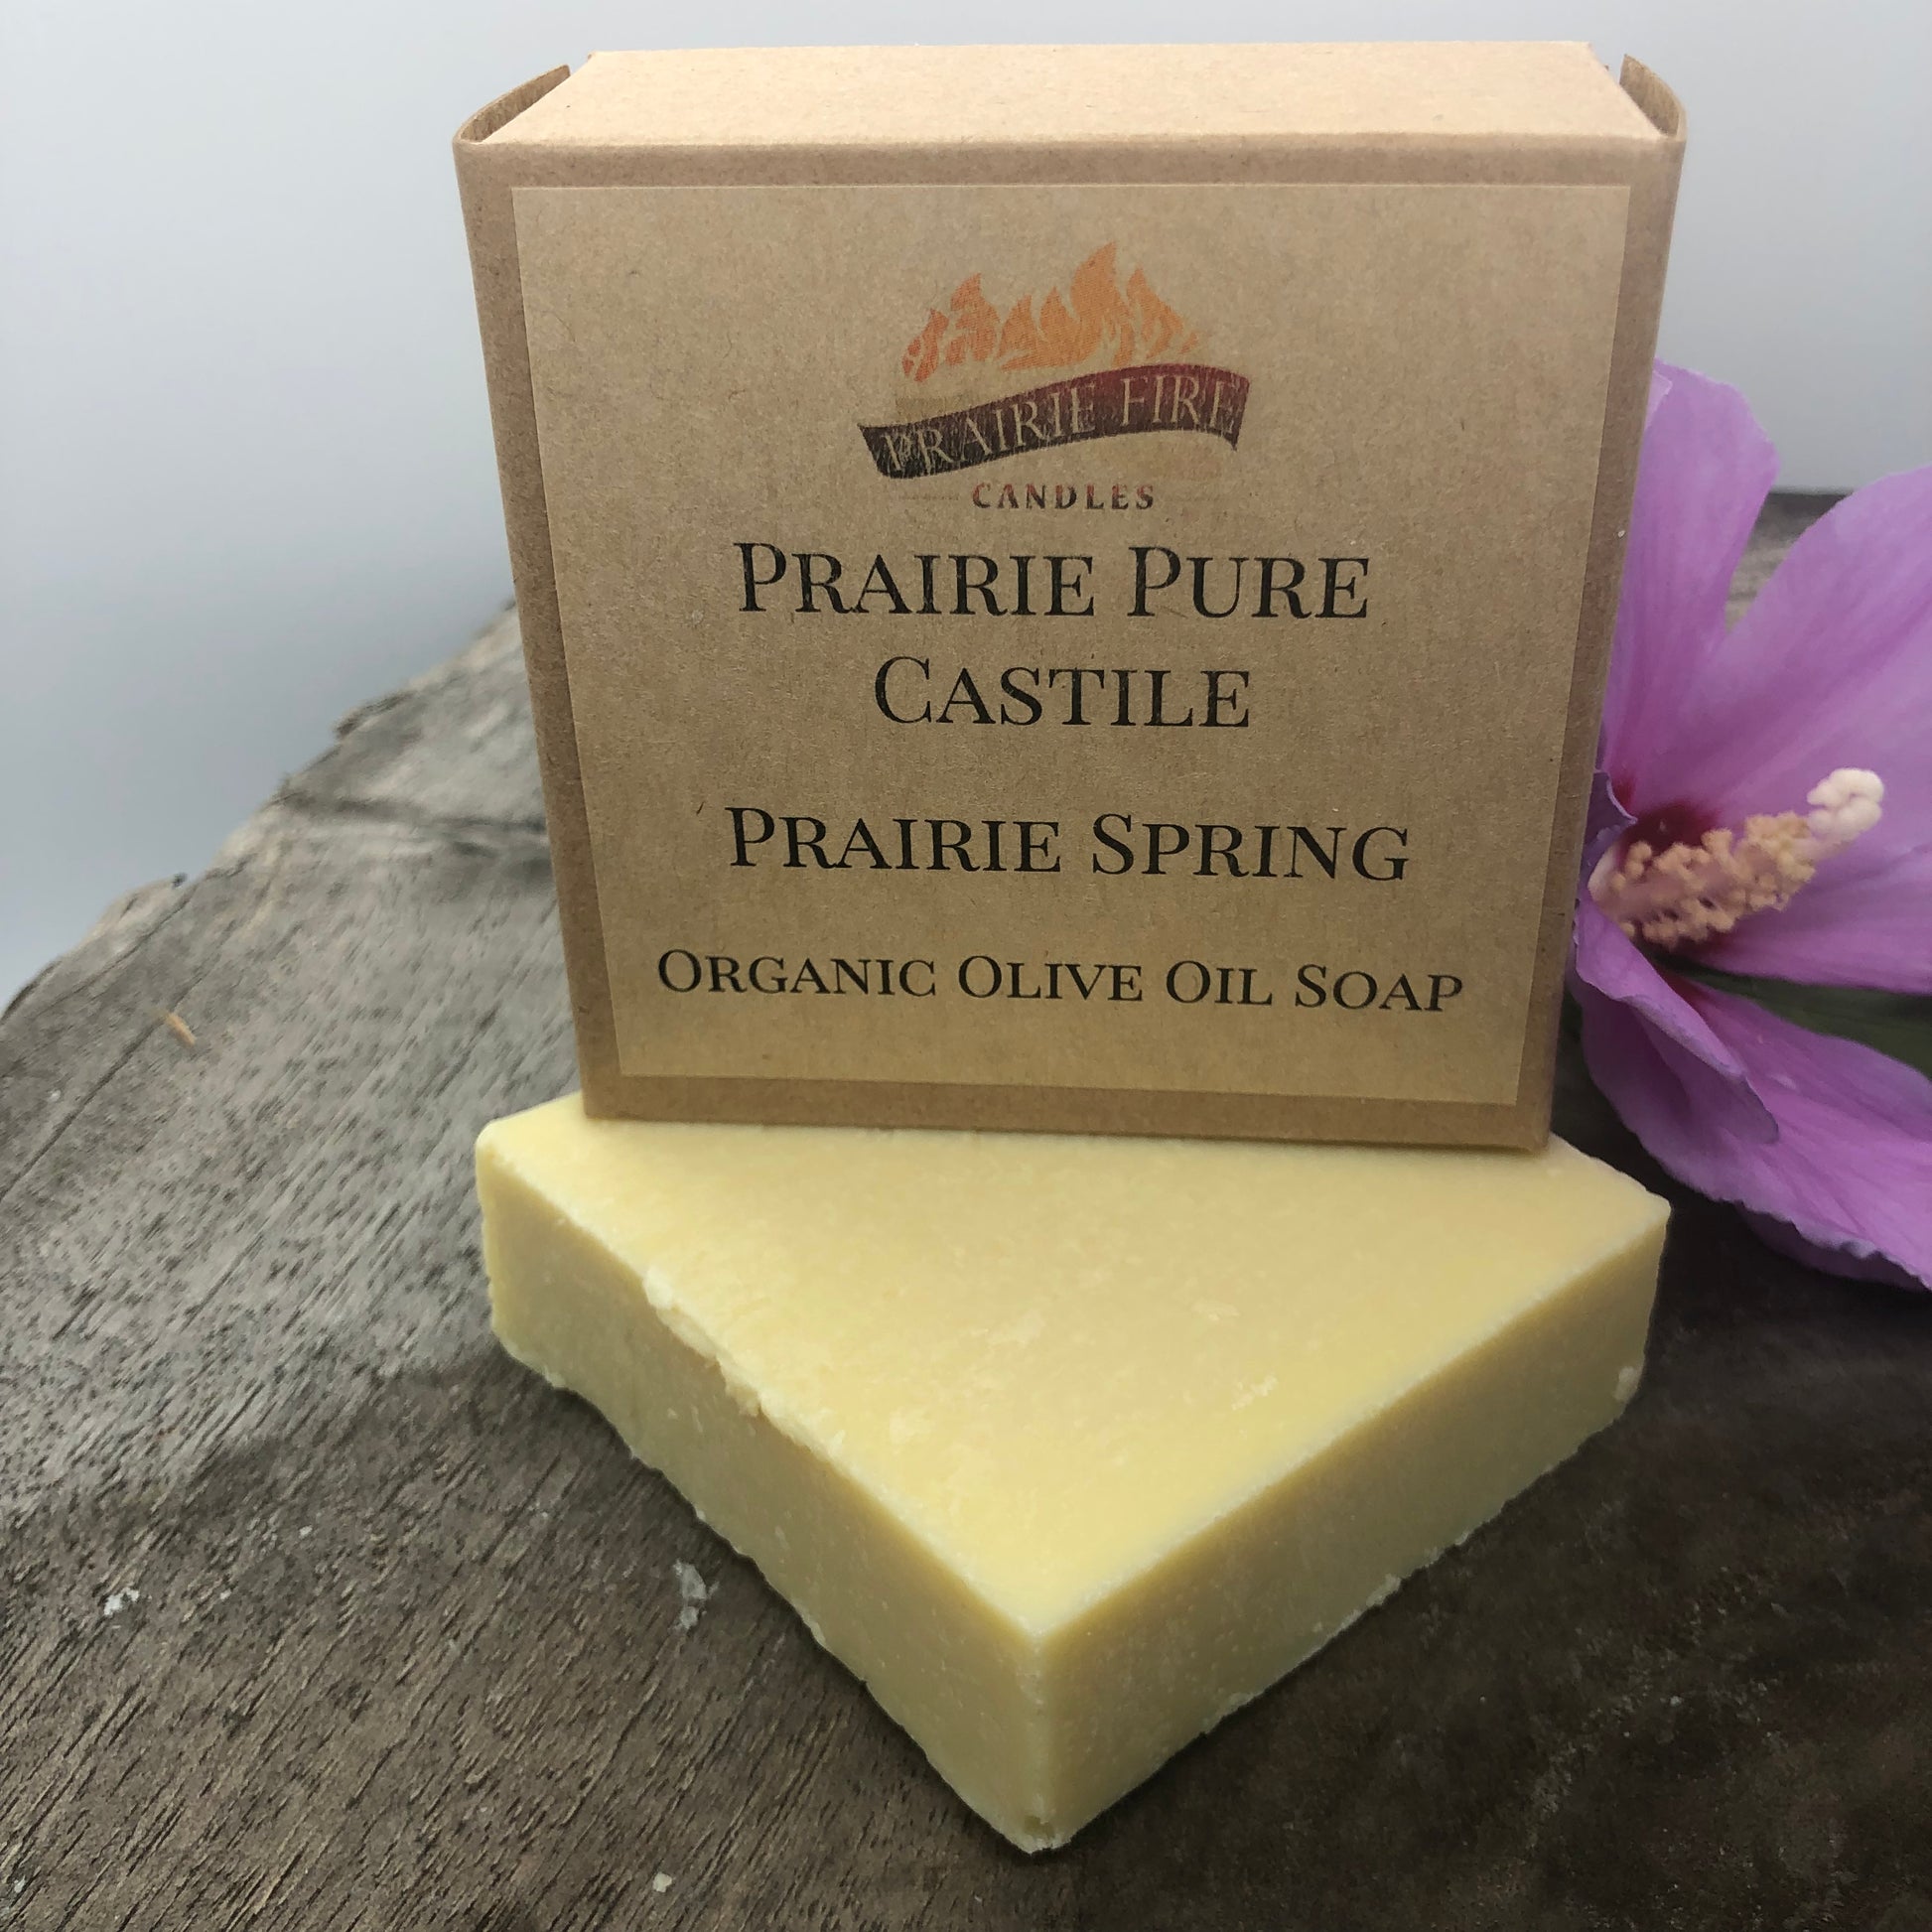 Prairie Spring Real Castile Organic Olive Oil Soap for Sensitive Skin - Dye Free - 100% Certified Organic Extra Virgin Olive Oil - Prairie Fire Candles